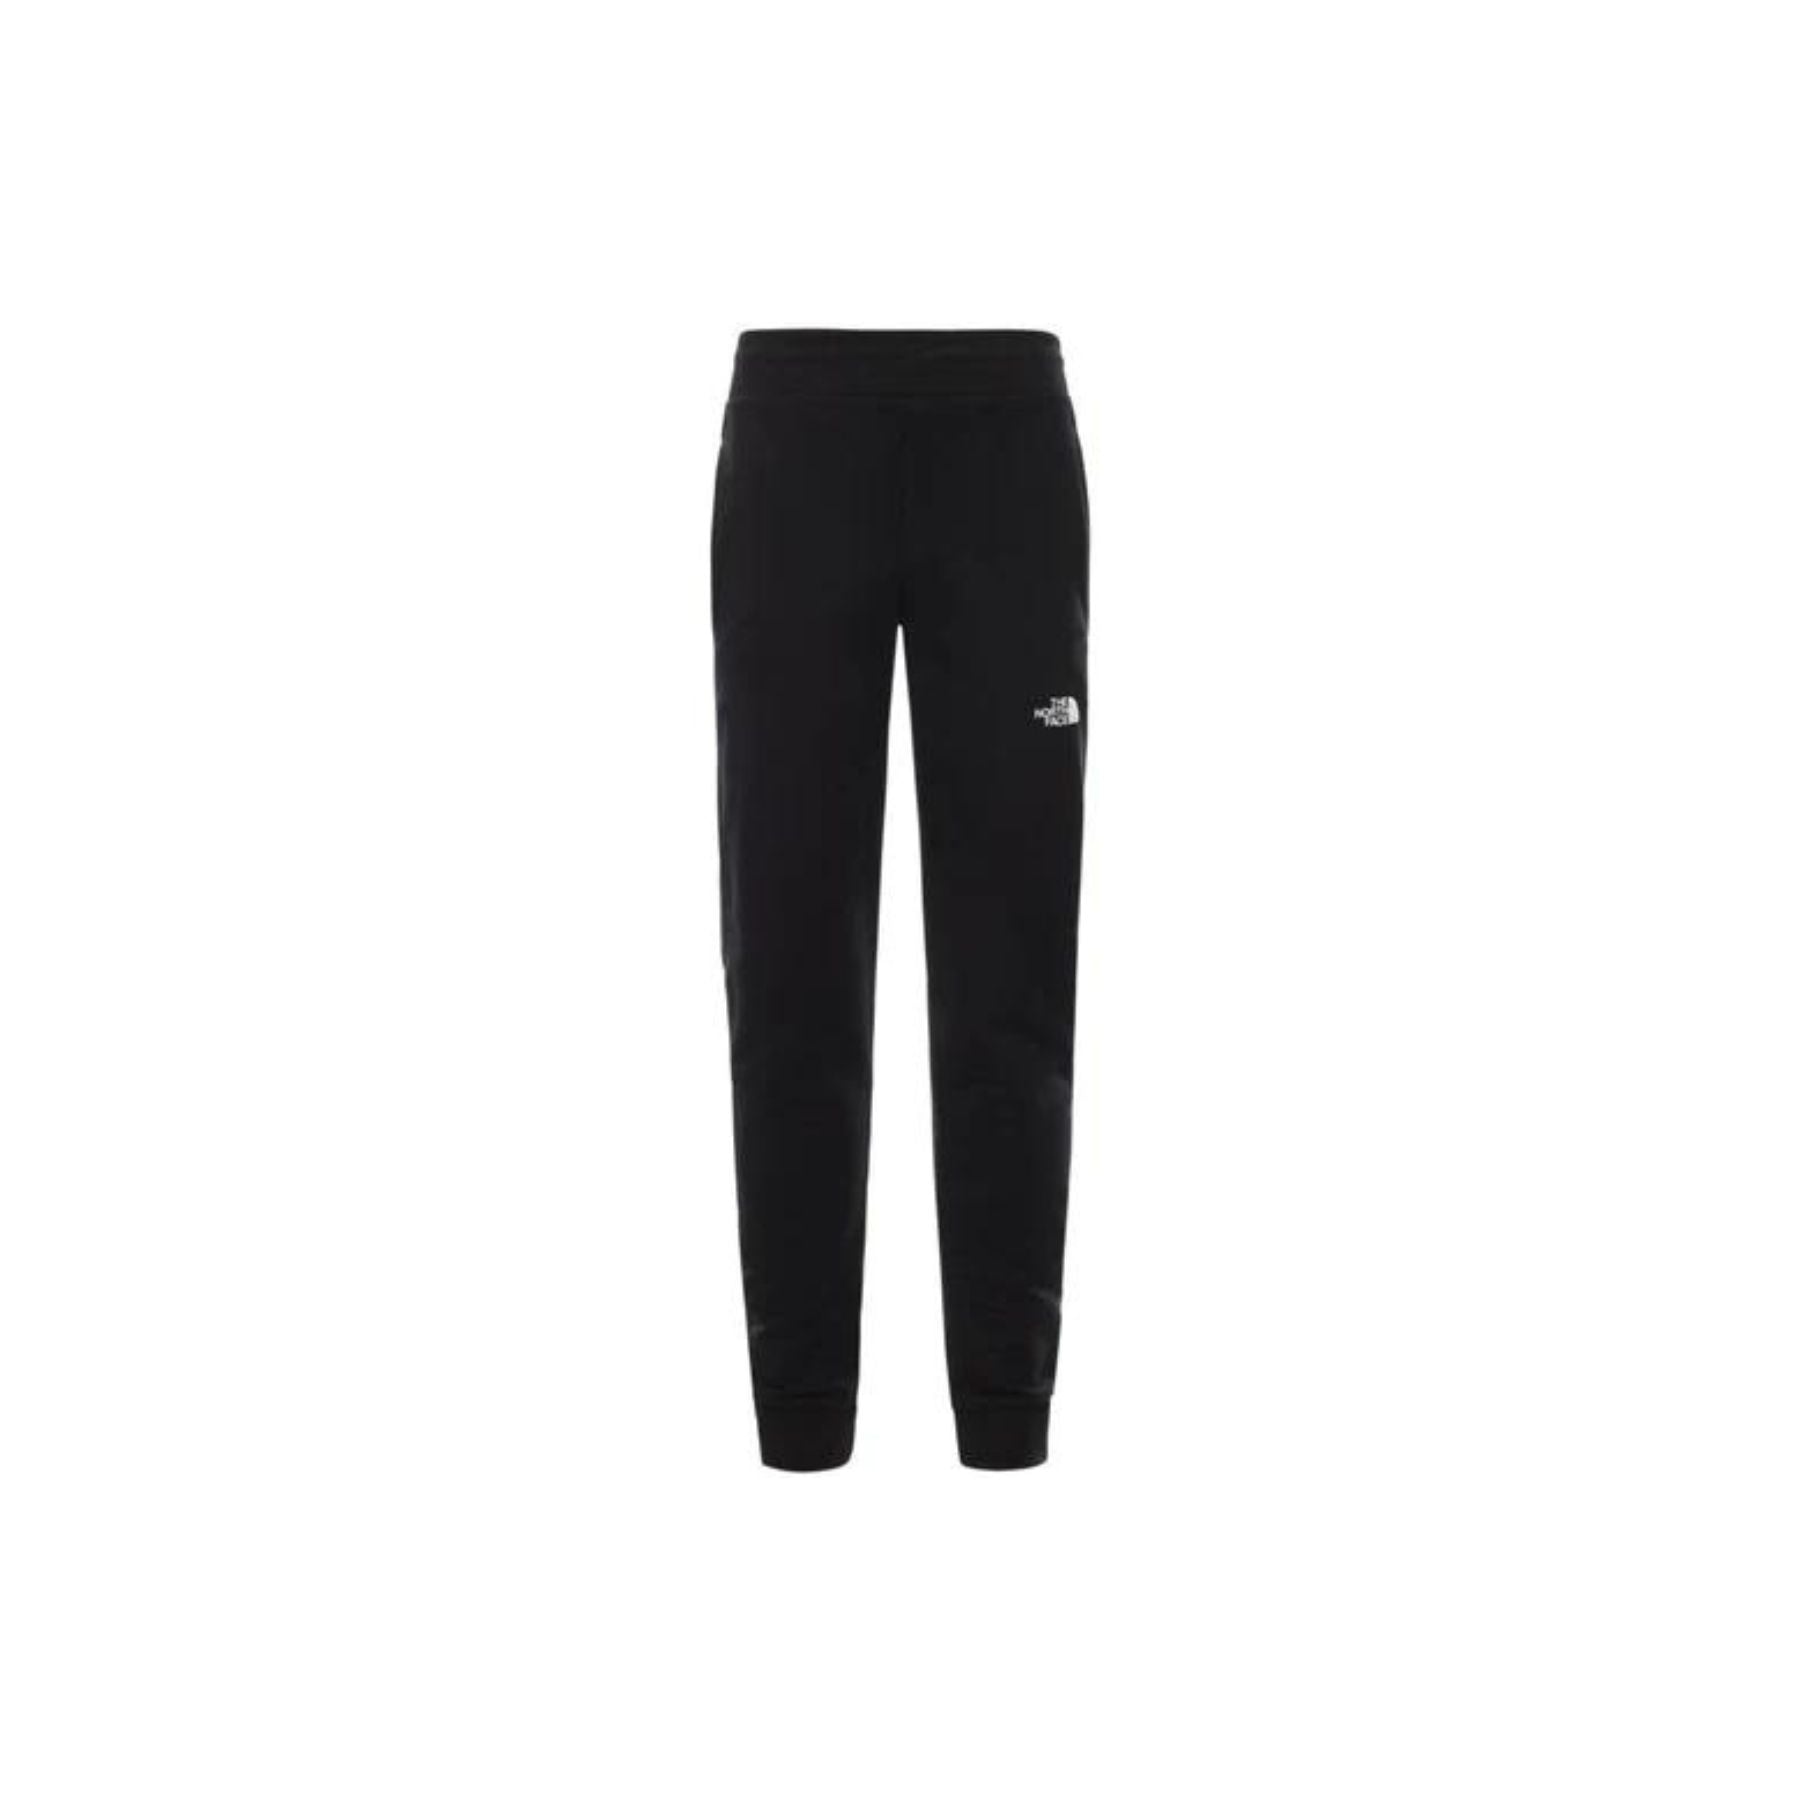 THE NORTH FACE LIGHT PANT M